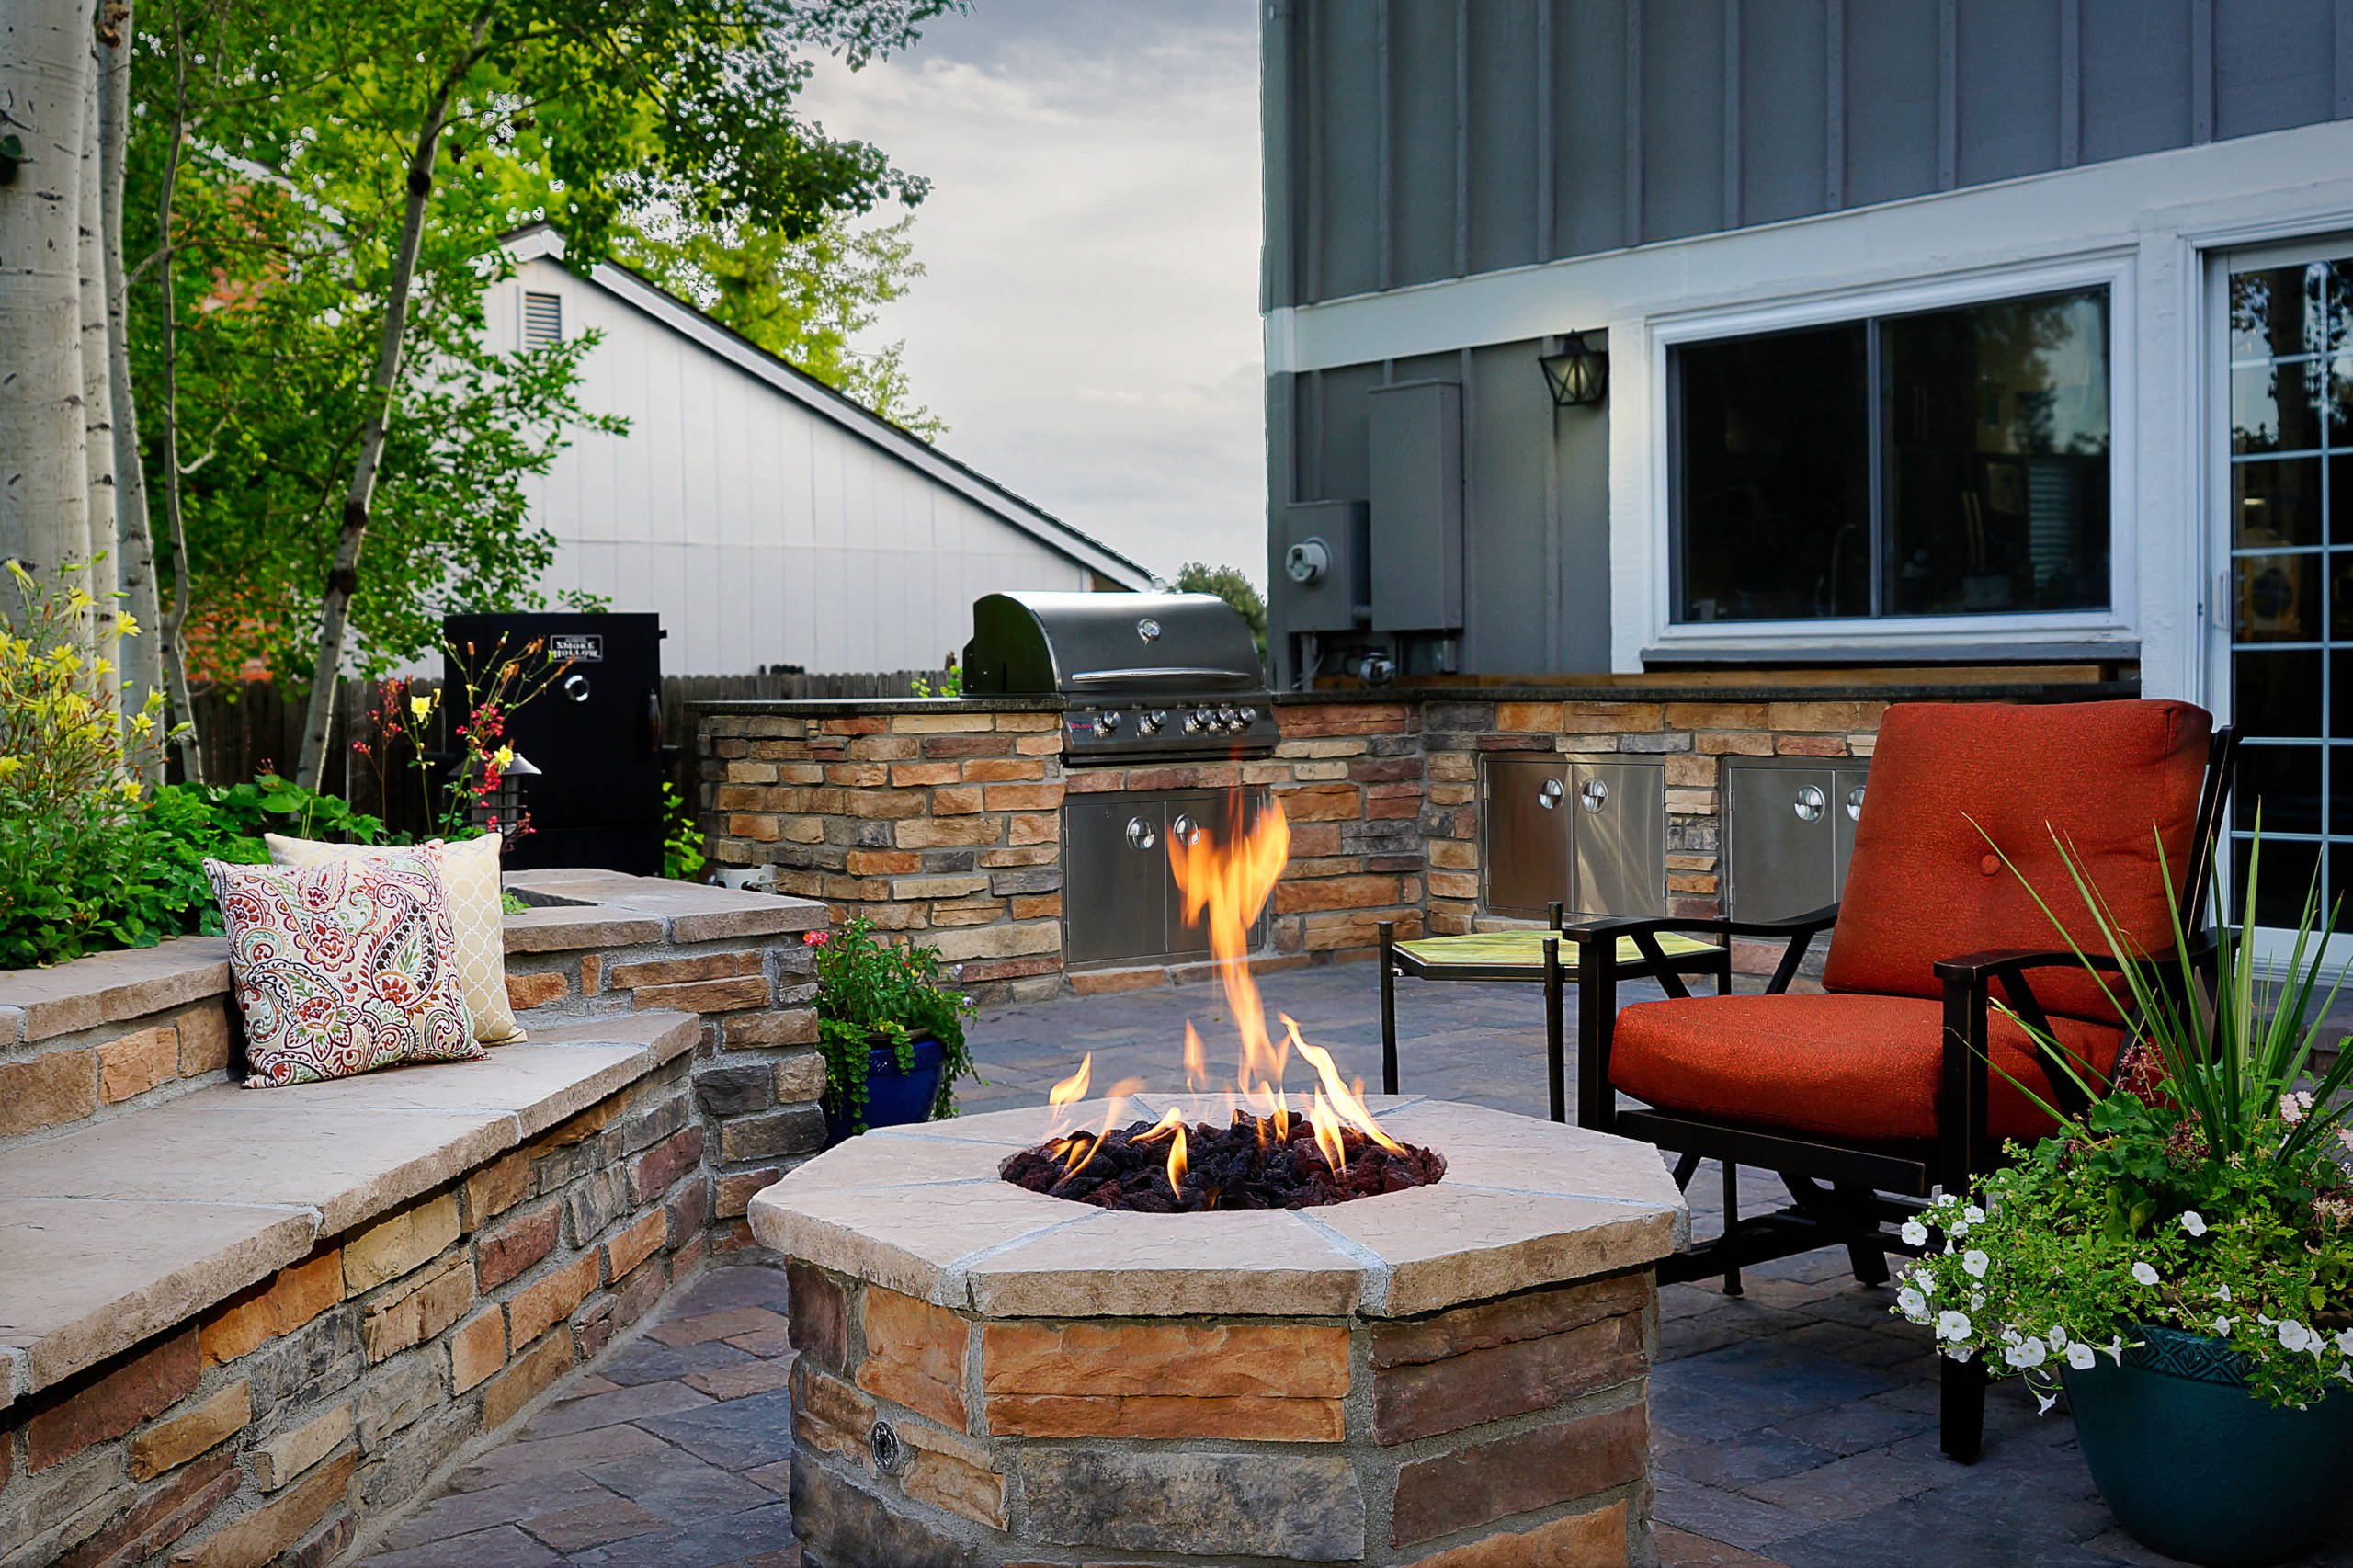 Cool Patio With Fire Pit And Roof Cover, Fire Pit Contractors